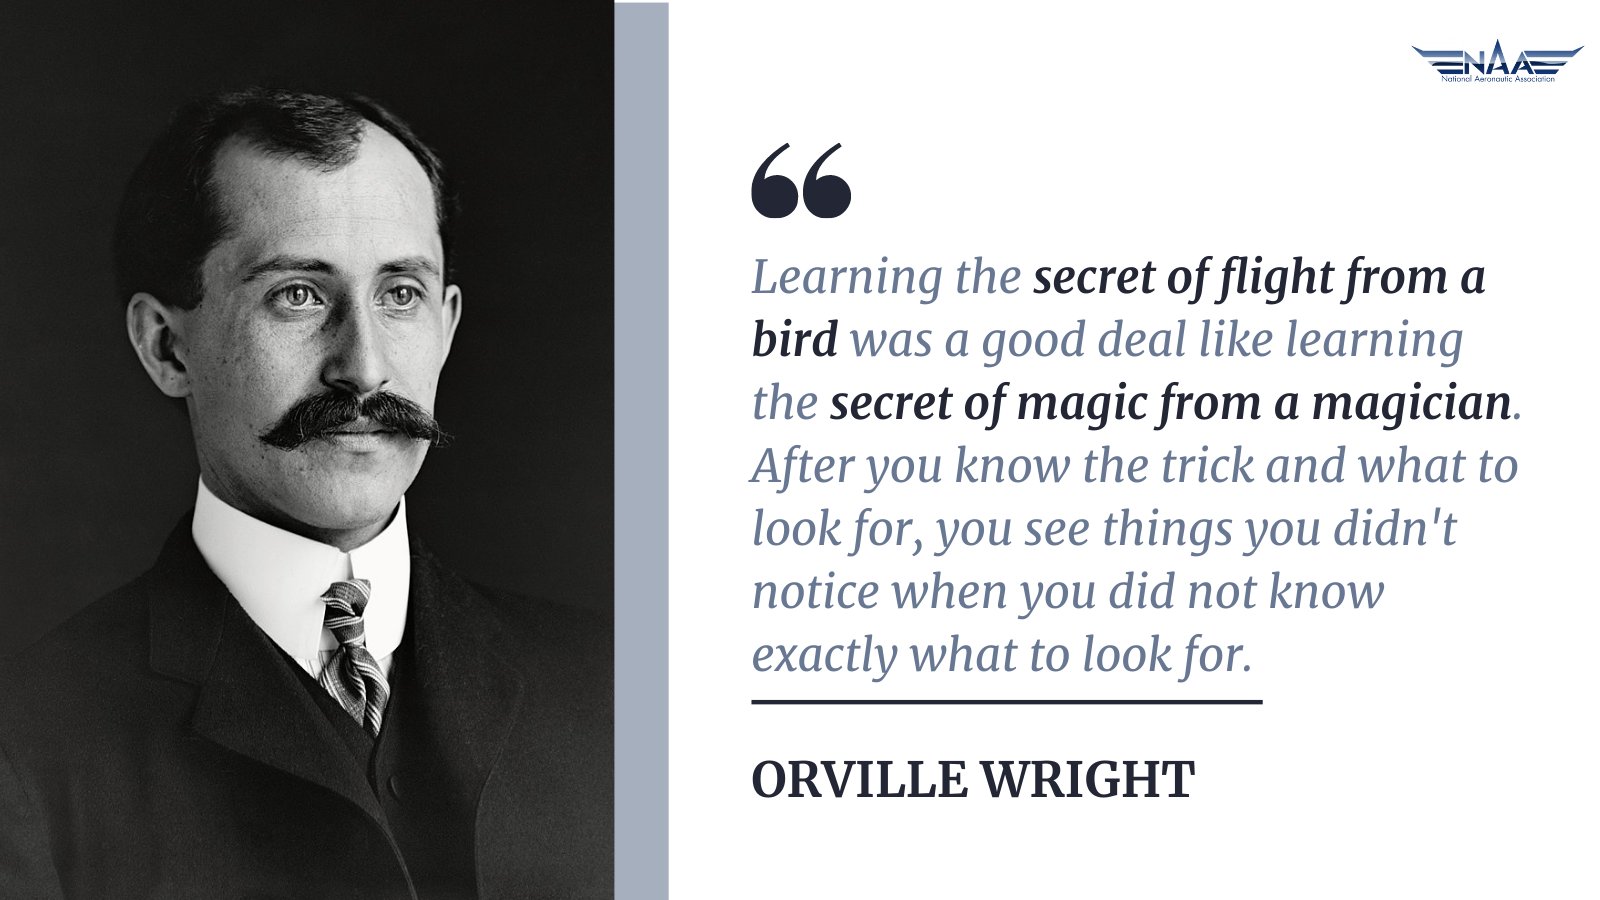 To the left is a black and white image of Orville Wright from the shoulders up. To the right is a quote by the inventor saying, "Learning the secret of flight from a bird was a good deal like learning the secret of magic from a magician. After you know the trick and what to look for, you see things you didn't notice when you did not know exactly what to look for."